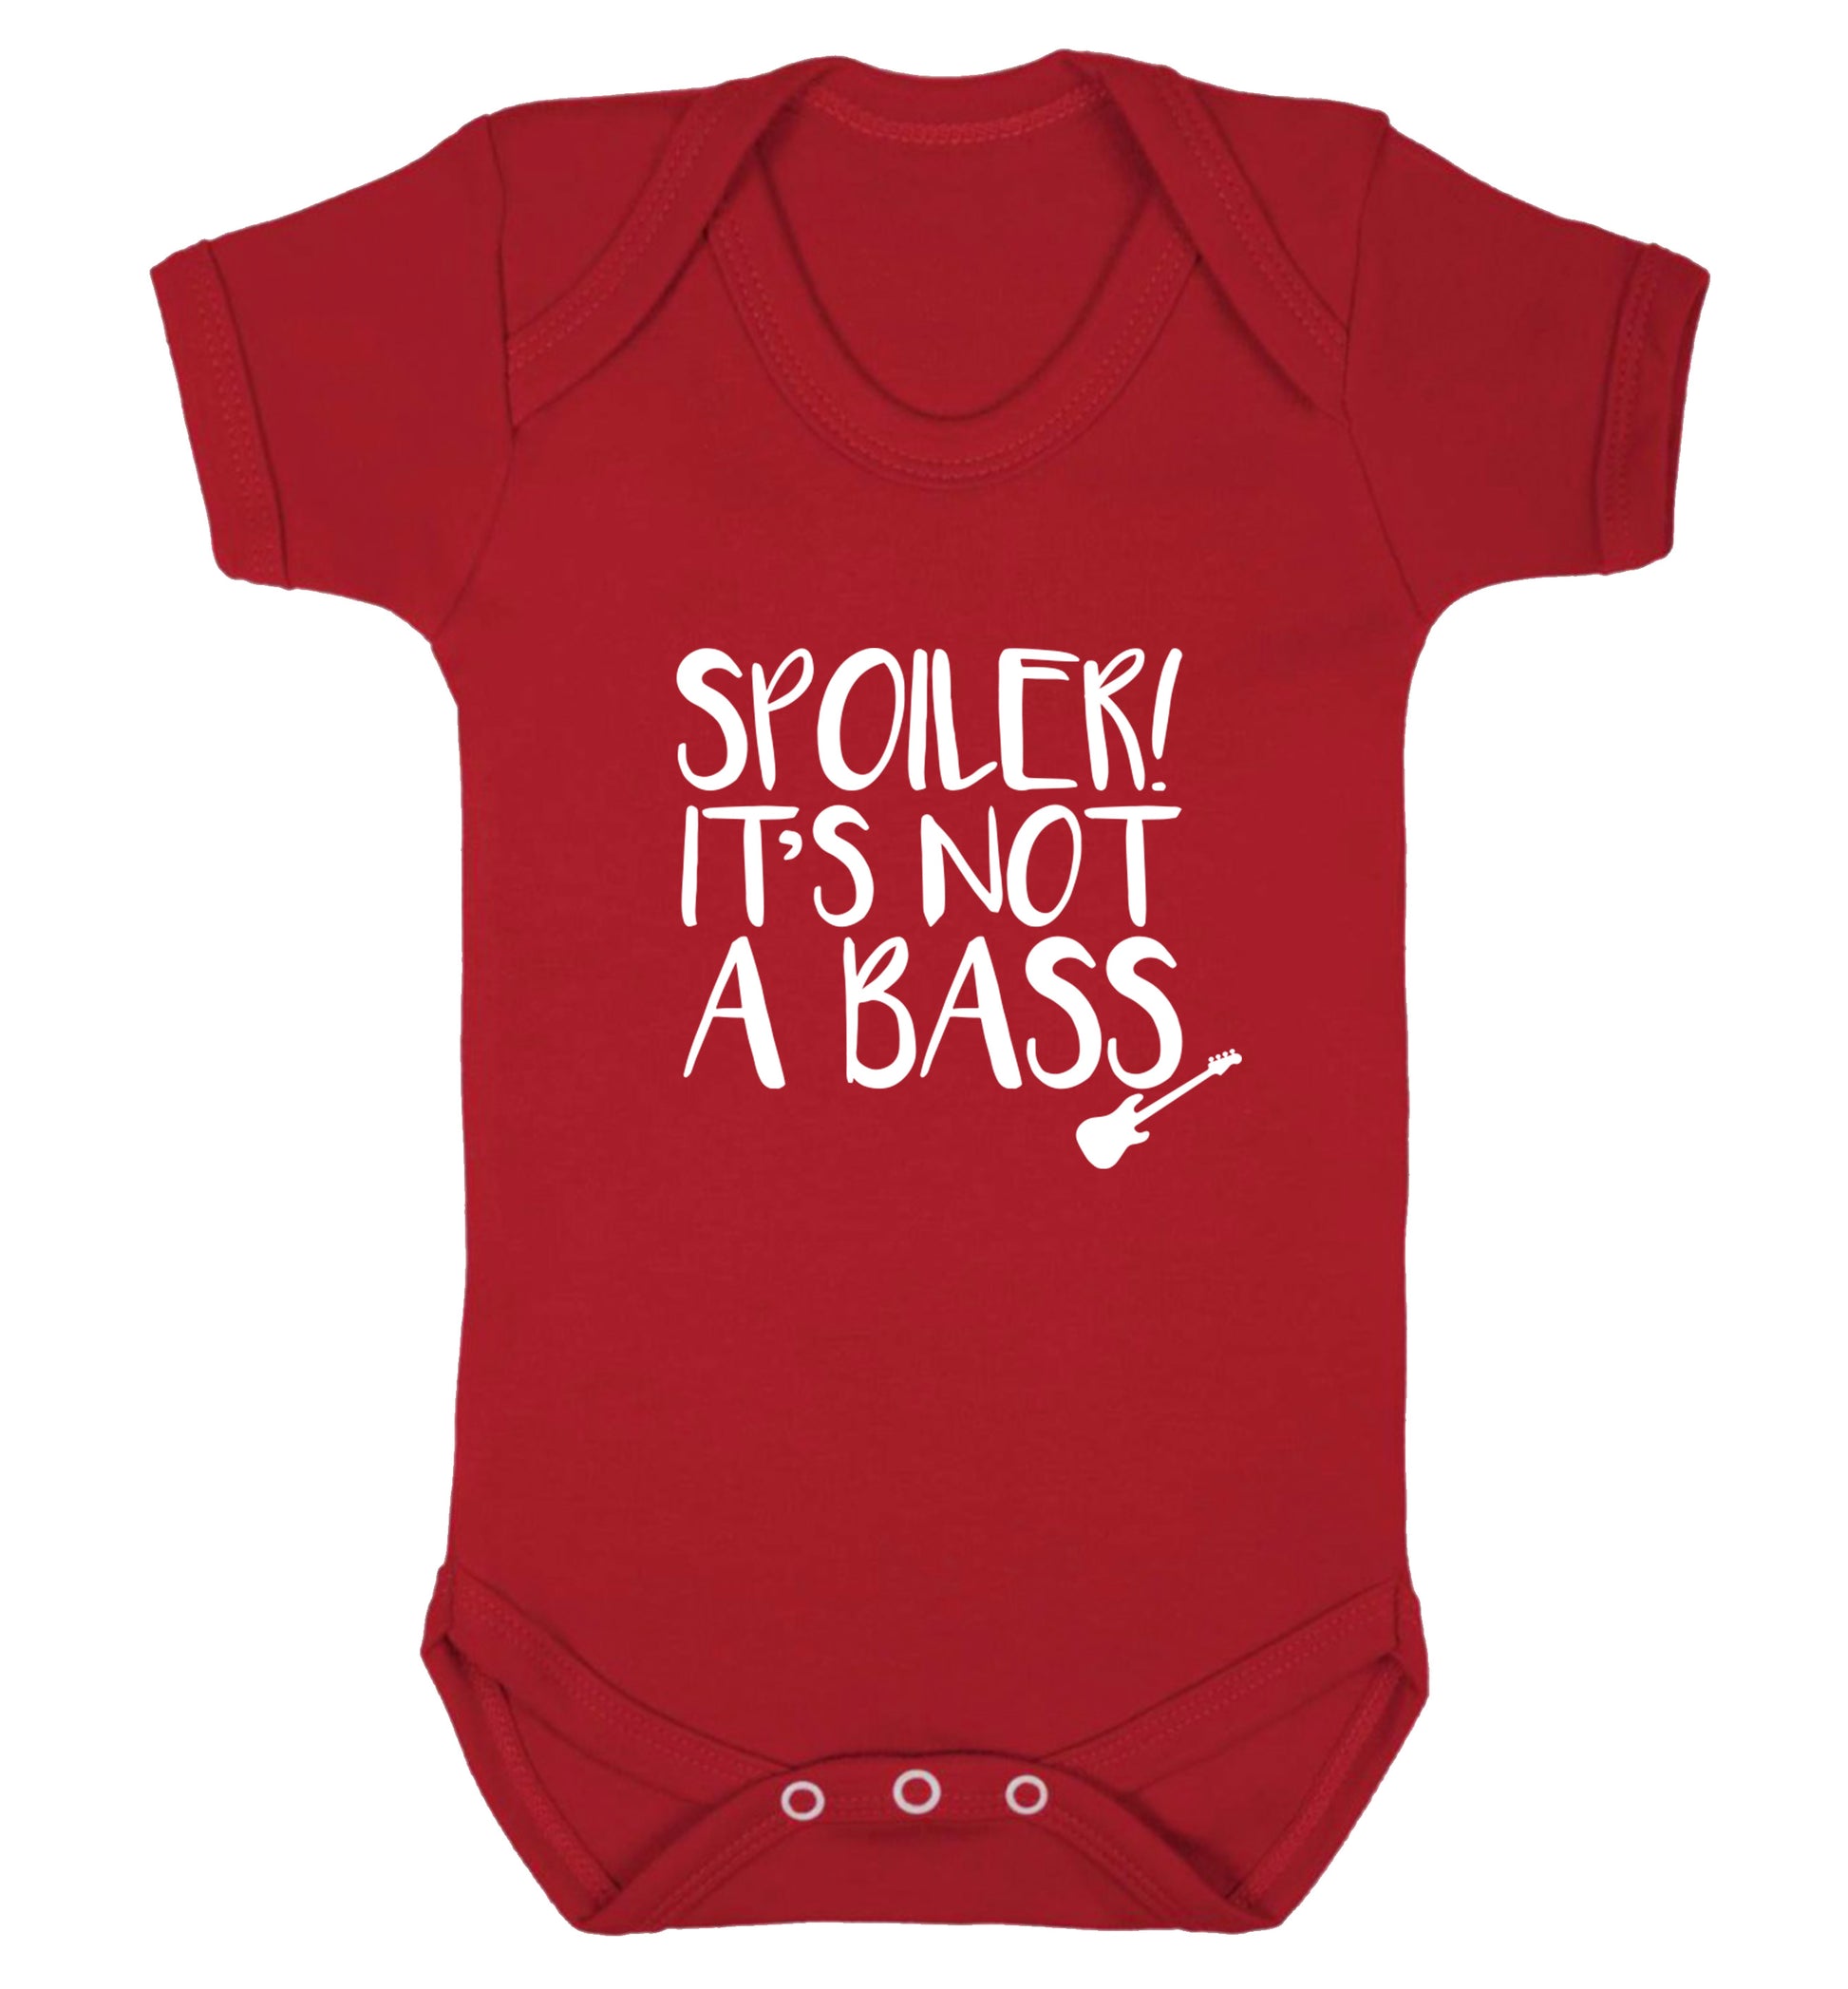 Spoiler it's not a bass Baby Vest red 18-24 months